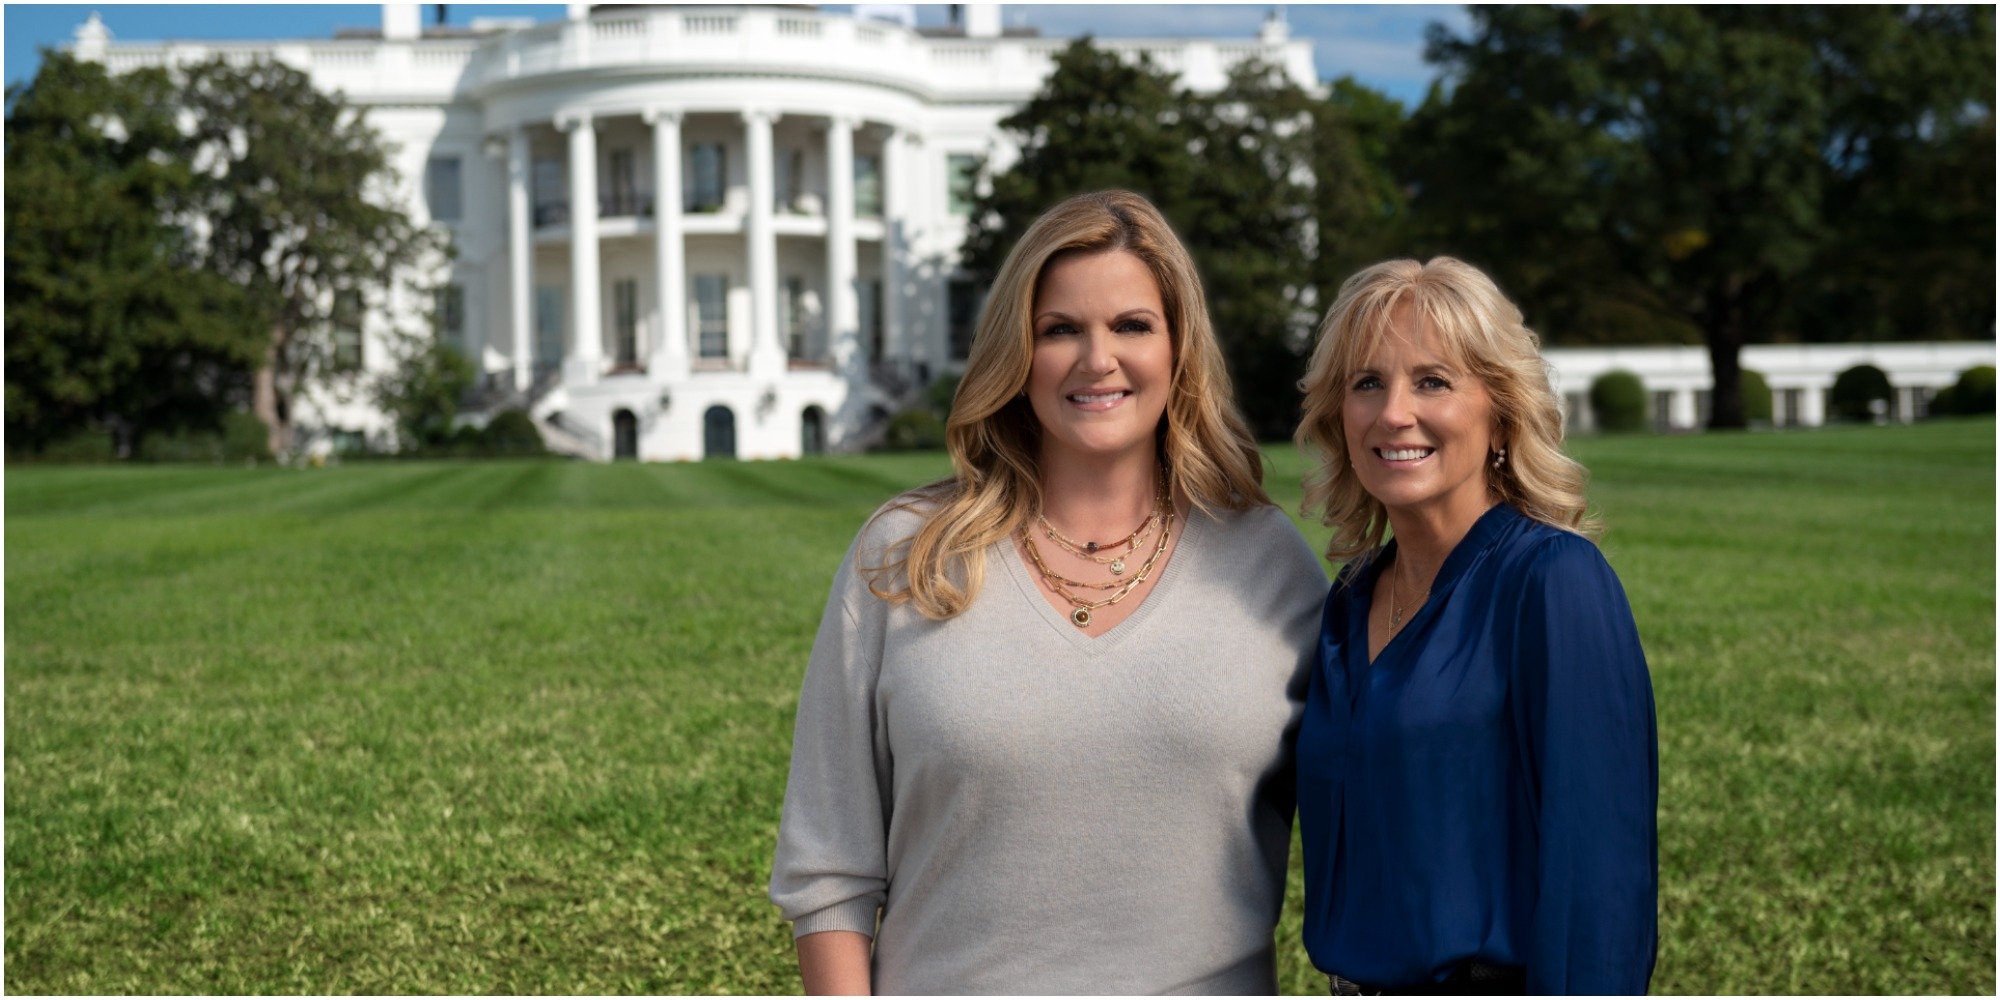 Trisha Yearwood and Jill Biden in front of The White House.